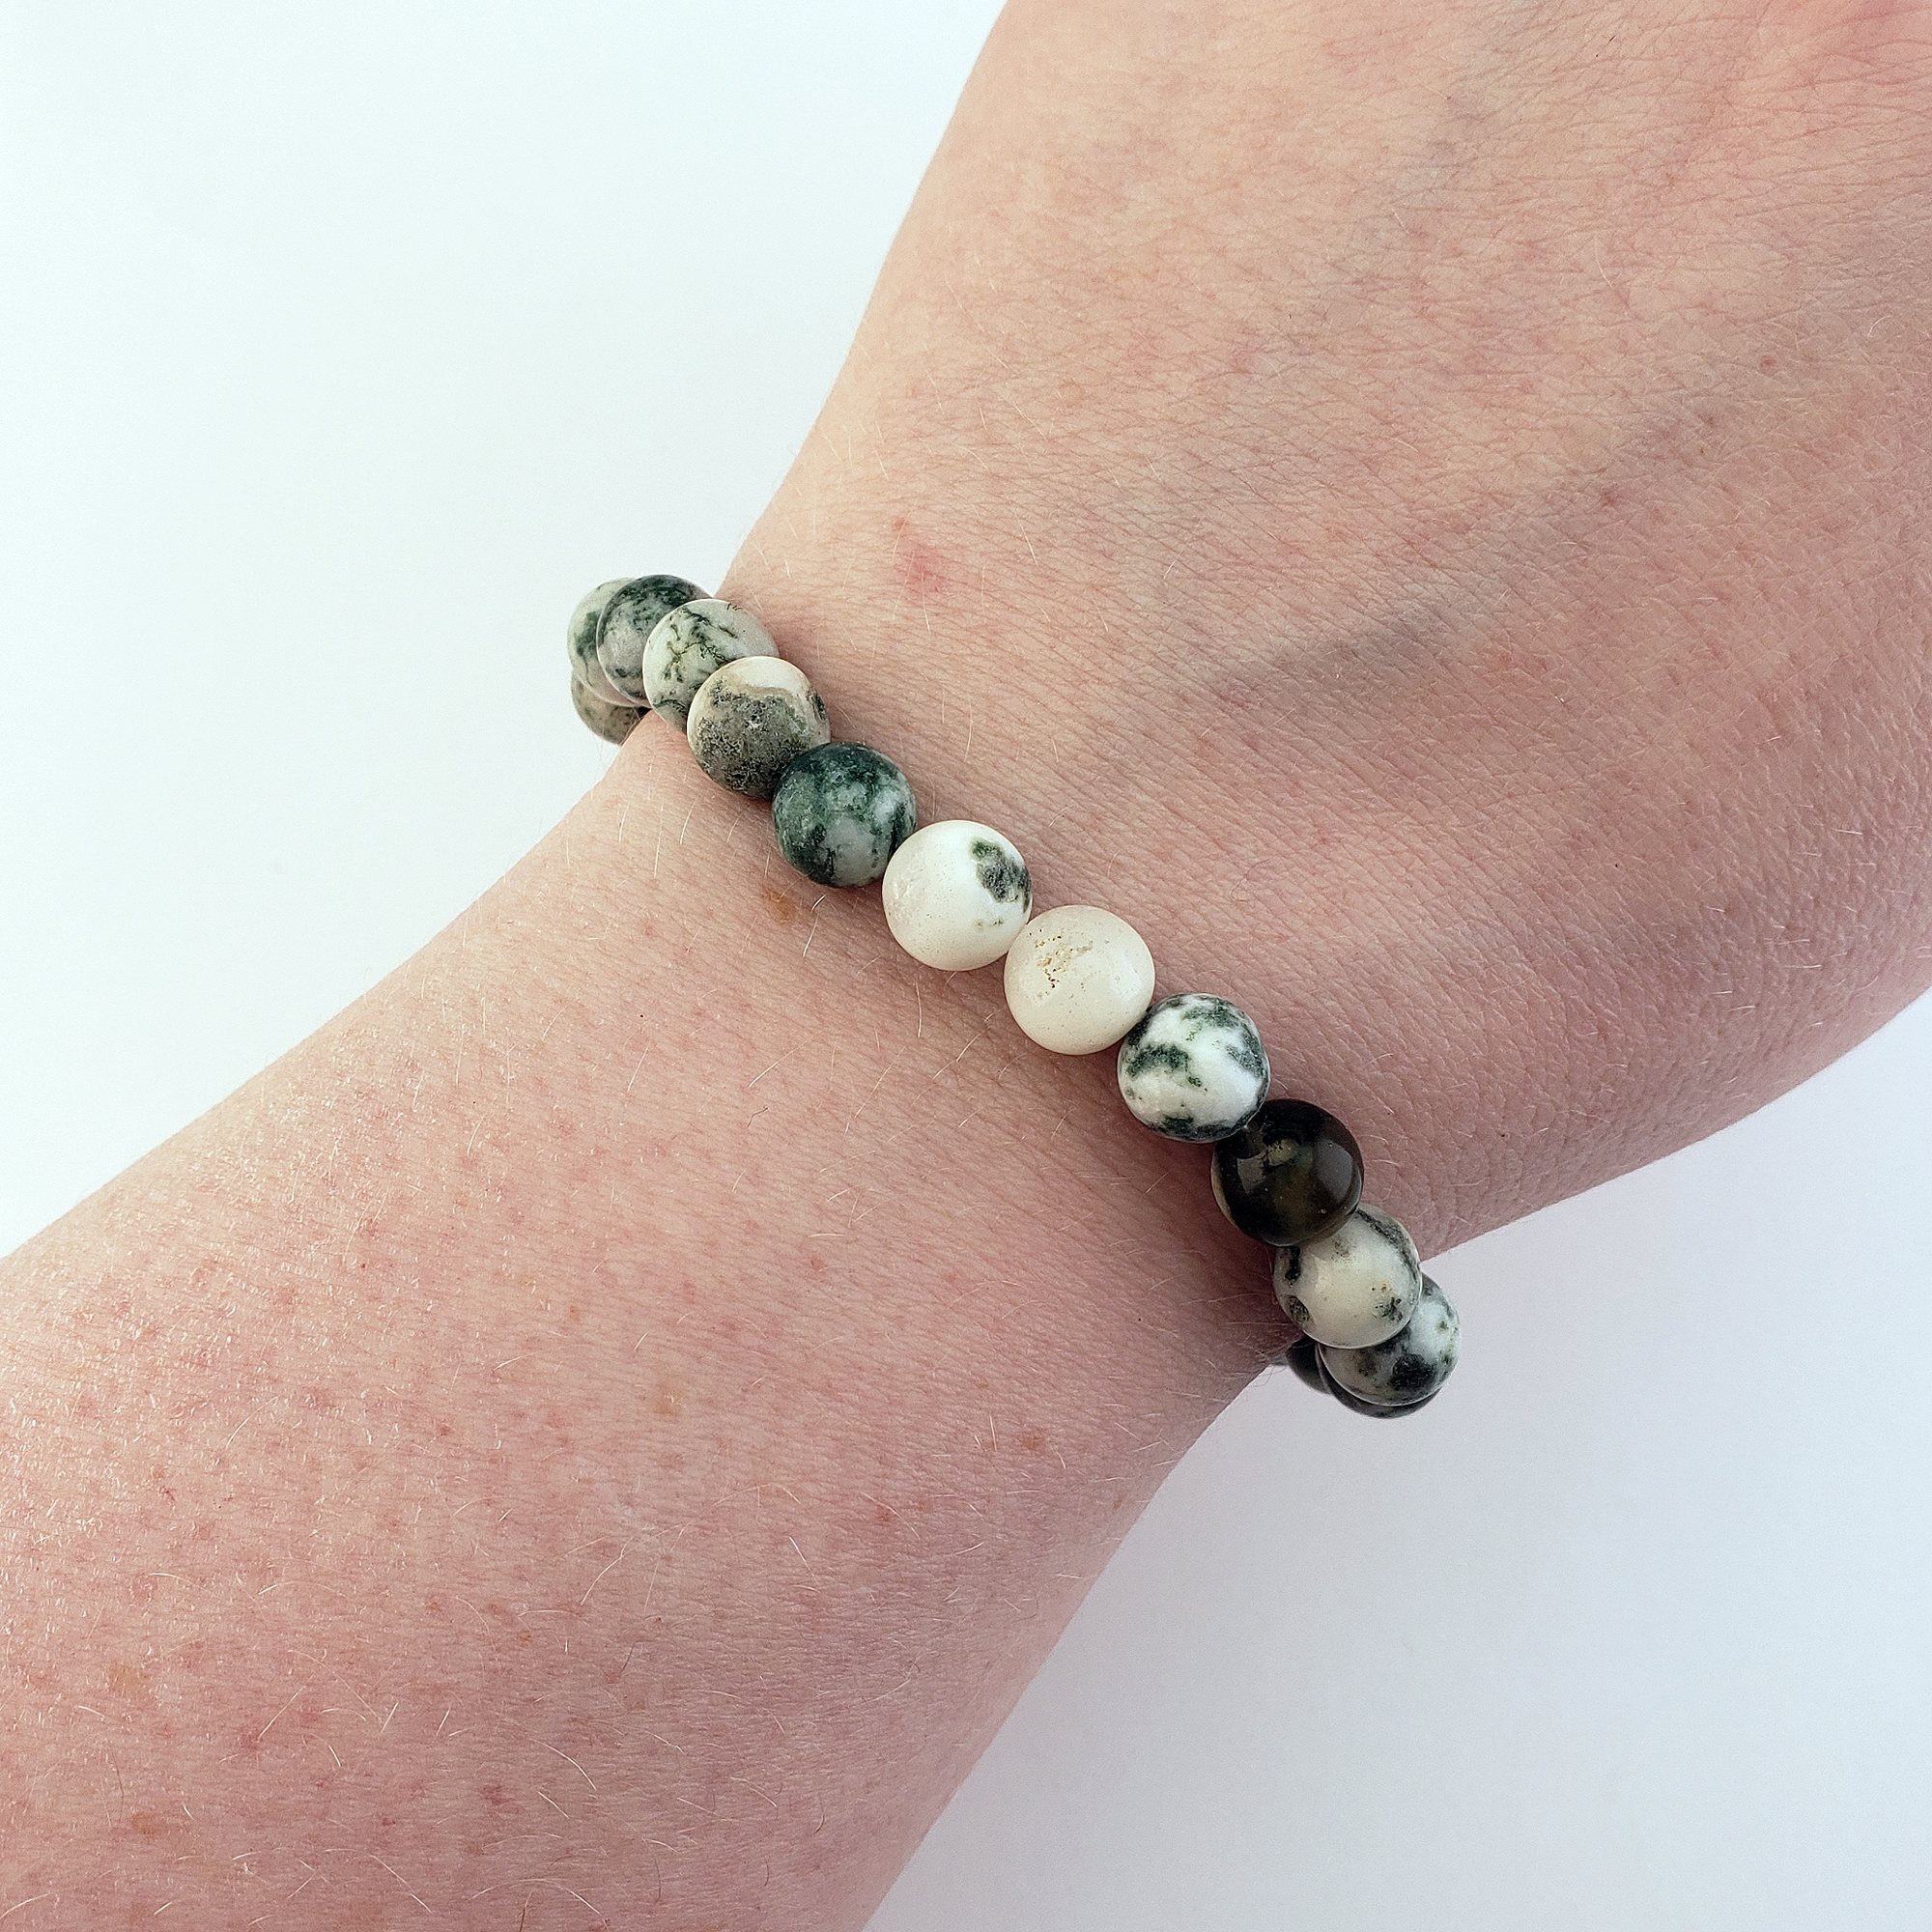 Tree Agate Natural Crystal 7-8mm Bead Bracelet - On Wrist White Background